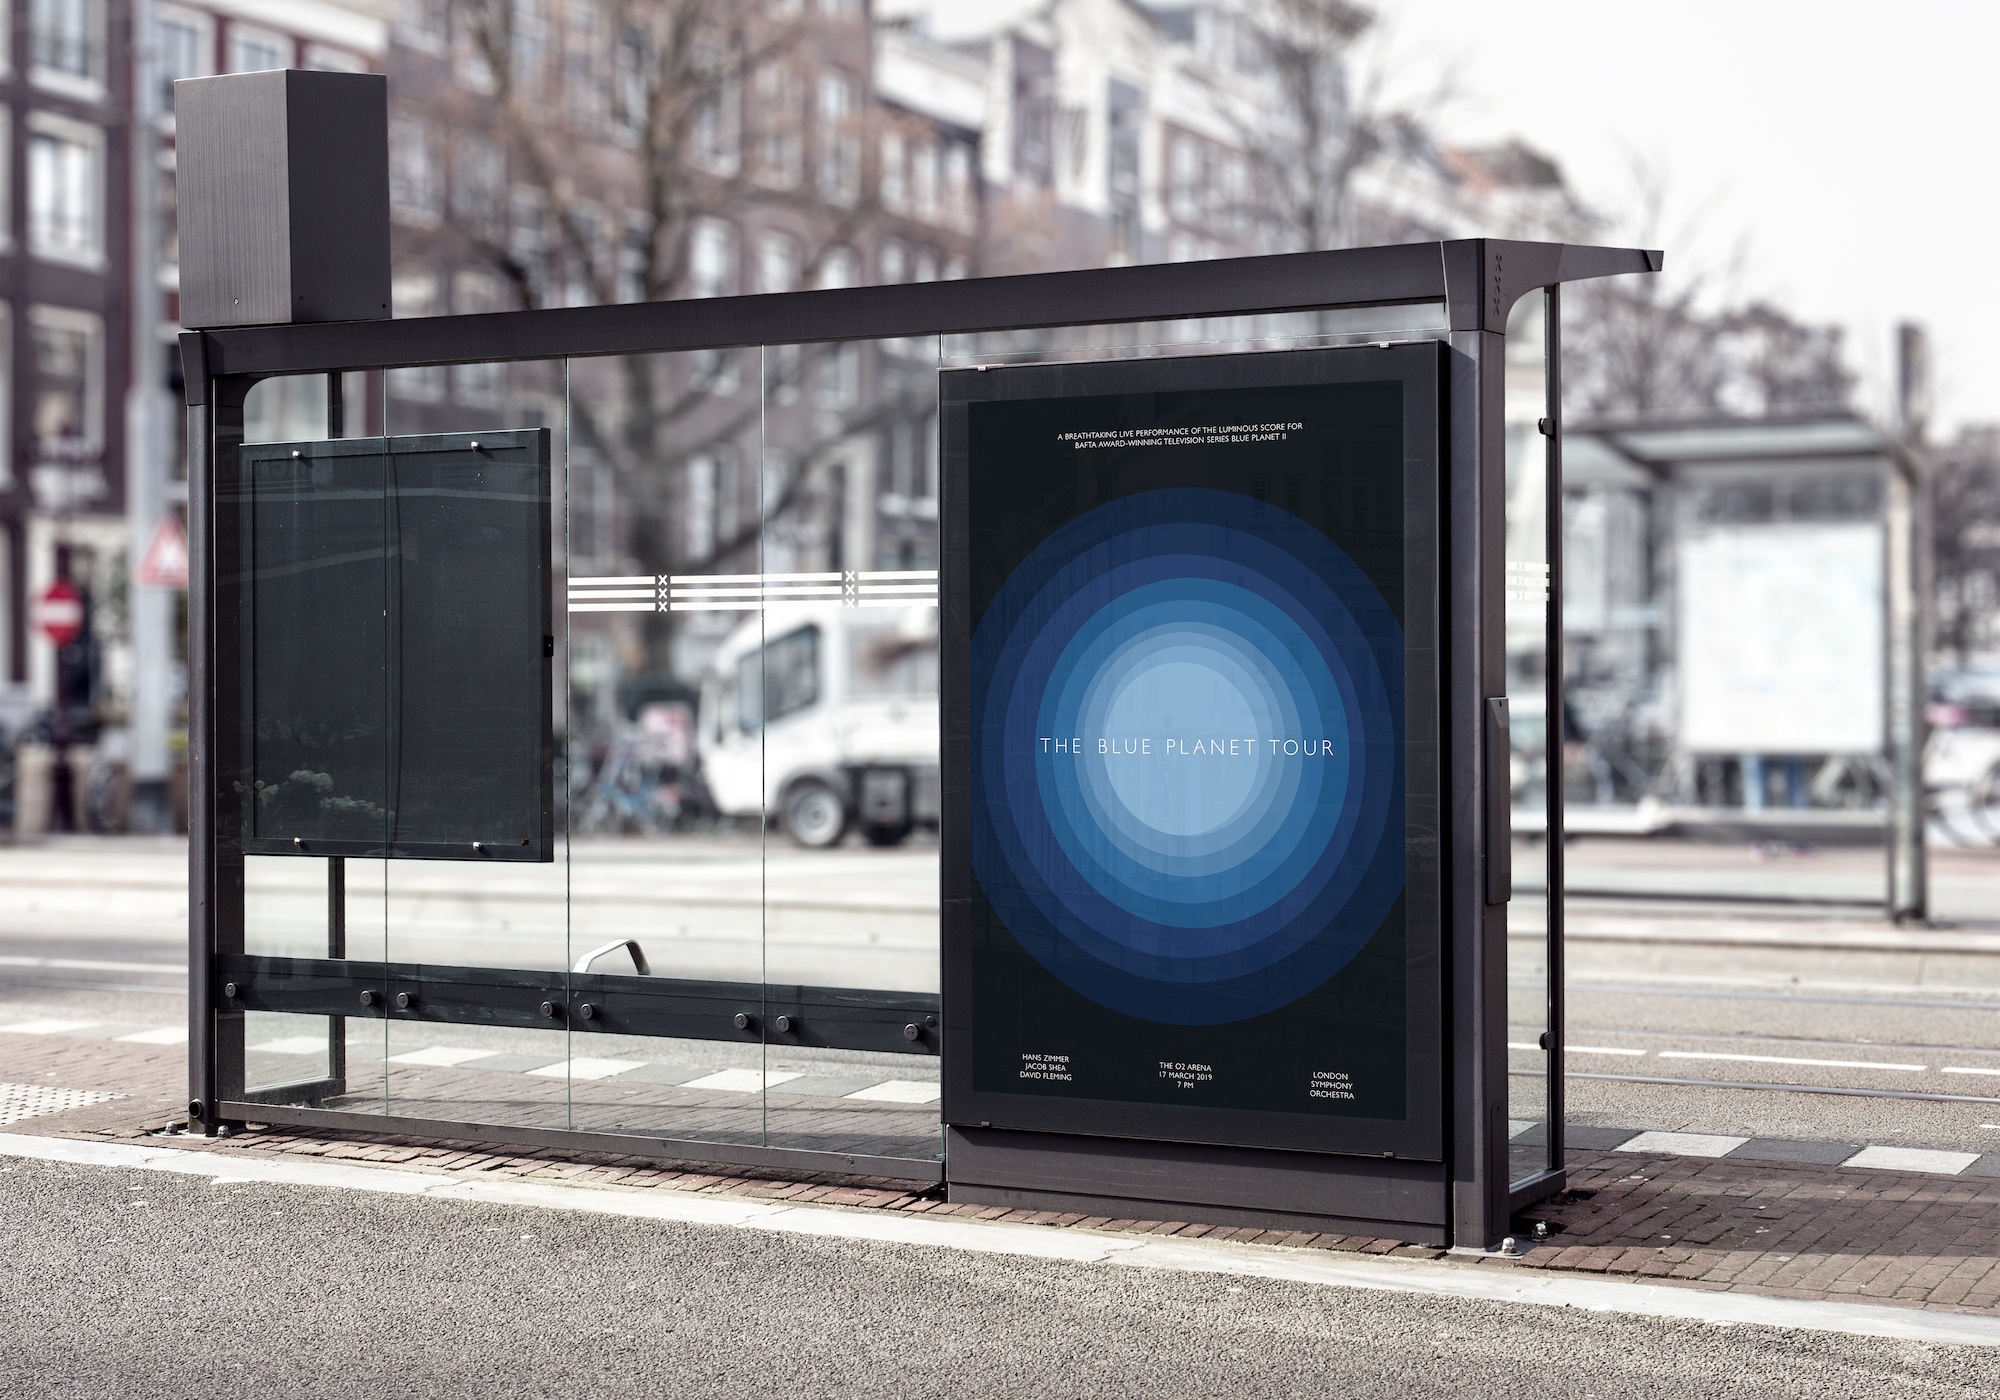 Poster Bus Stop